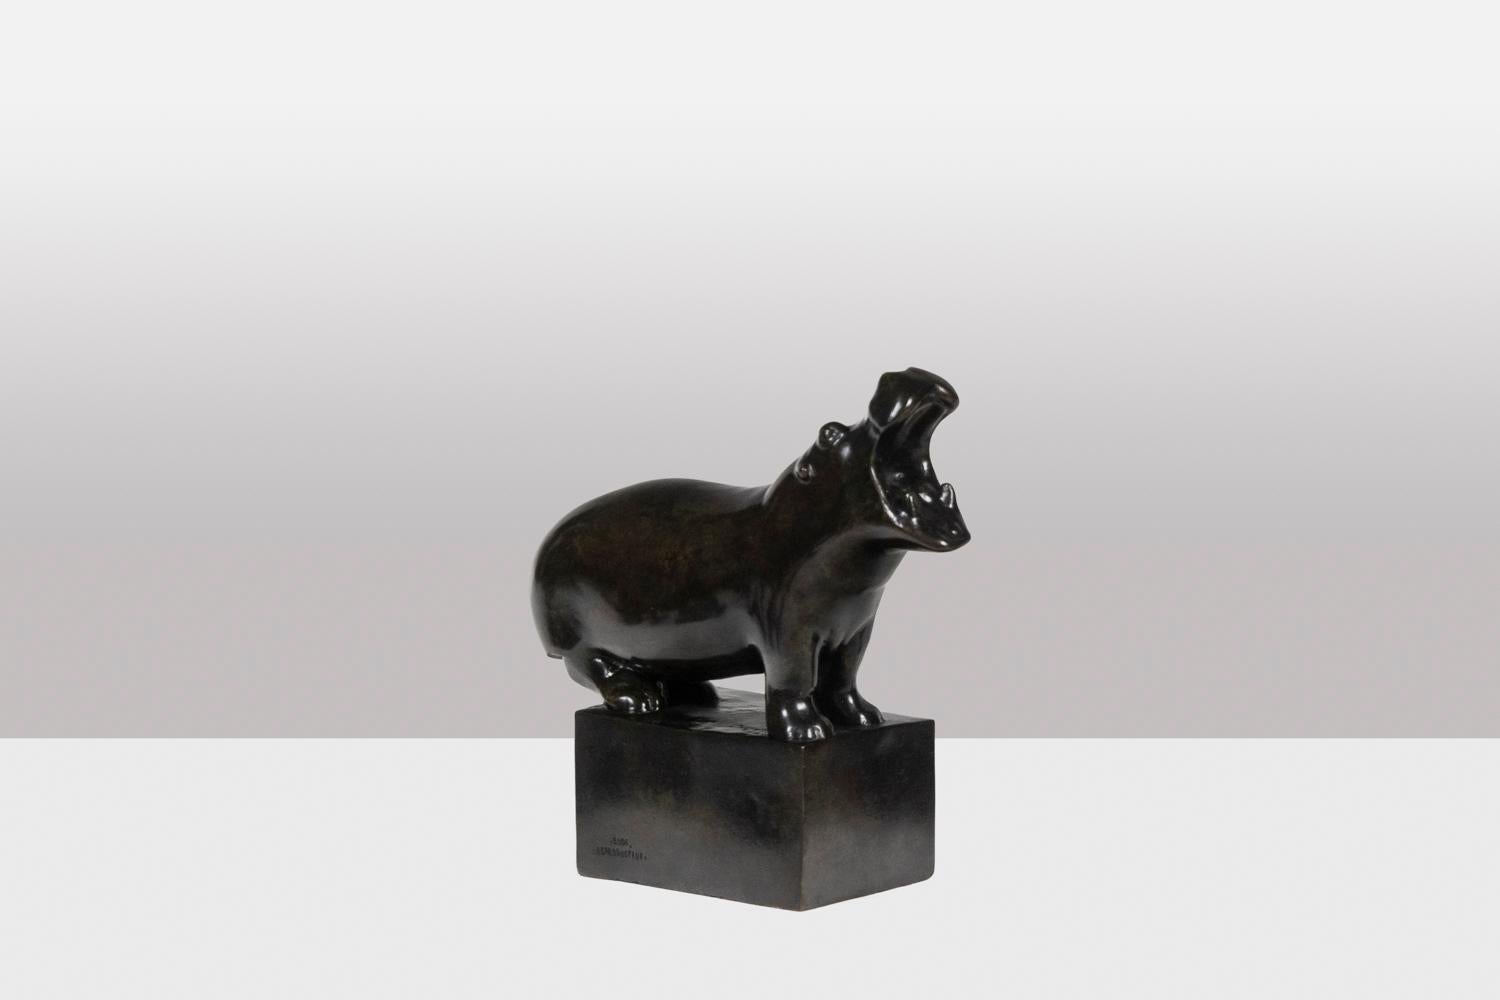 François Pompon.
Valsuani, edited by.

Sculpture entitled “Hippopotame”. Bronze with brown patina, lost wax casting.

Stamp of the Foundry “cire perdue C. Valsuani” on the terrace. Reproduction dated 2006. Numbered 9/25.

Reference: LS59882409H